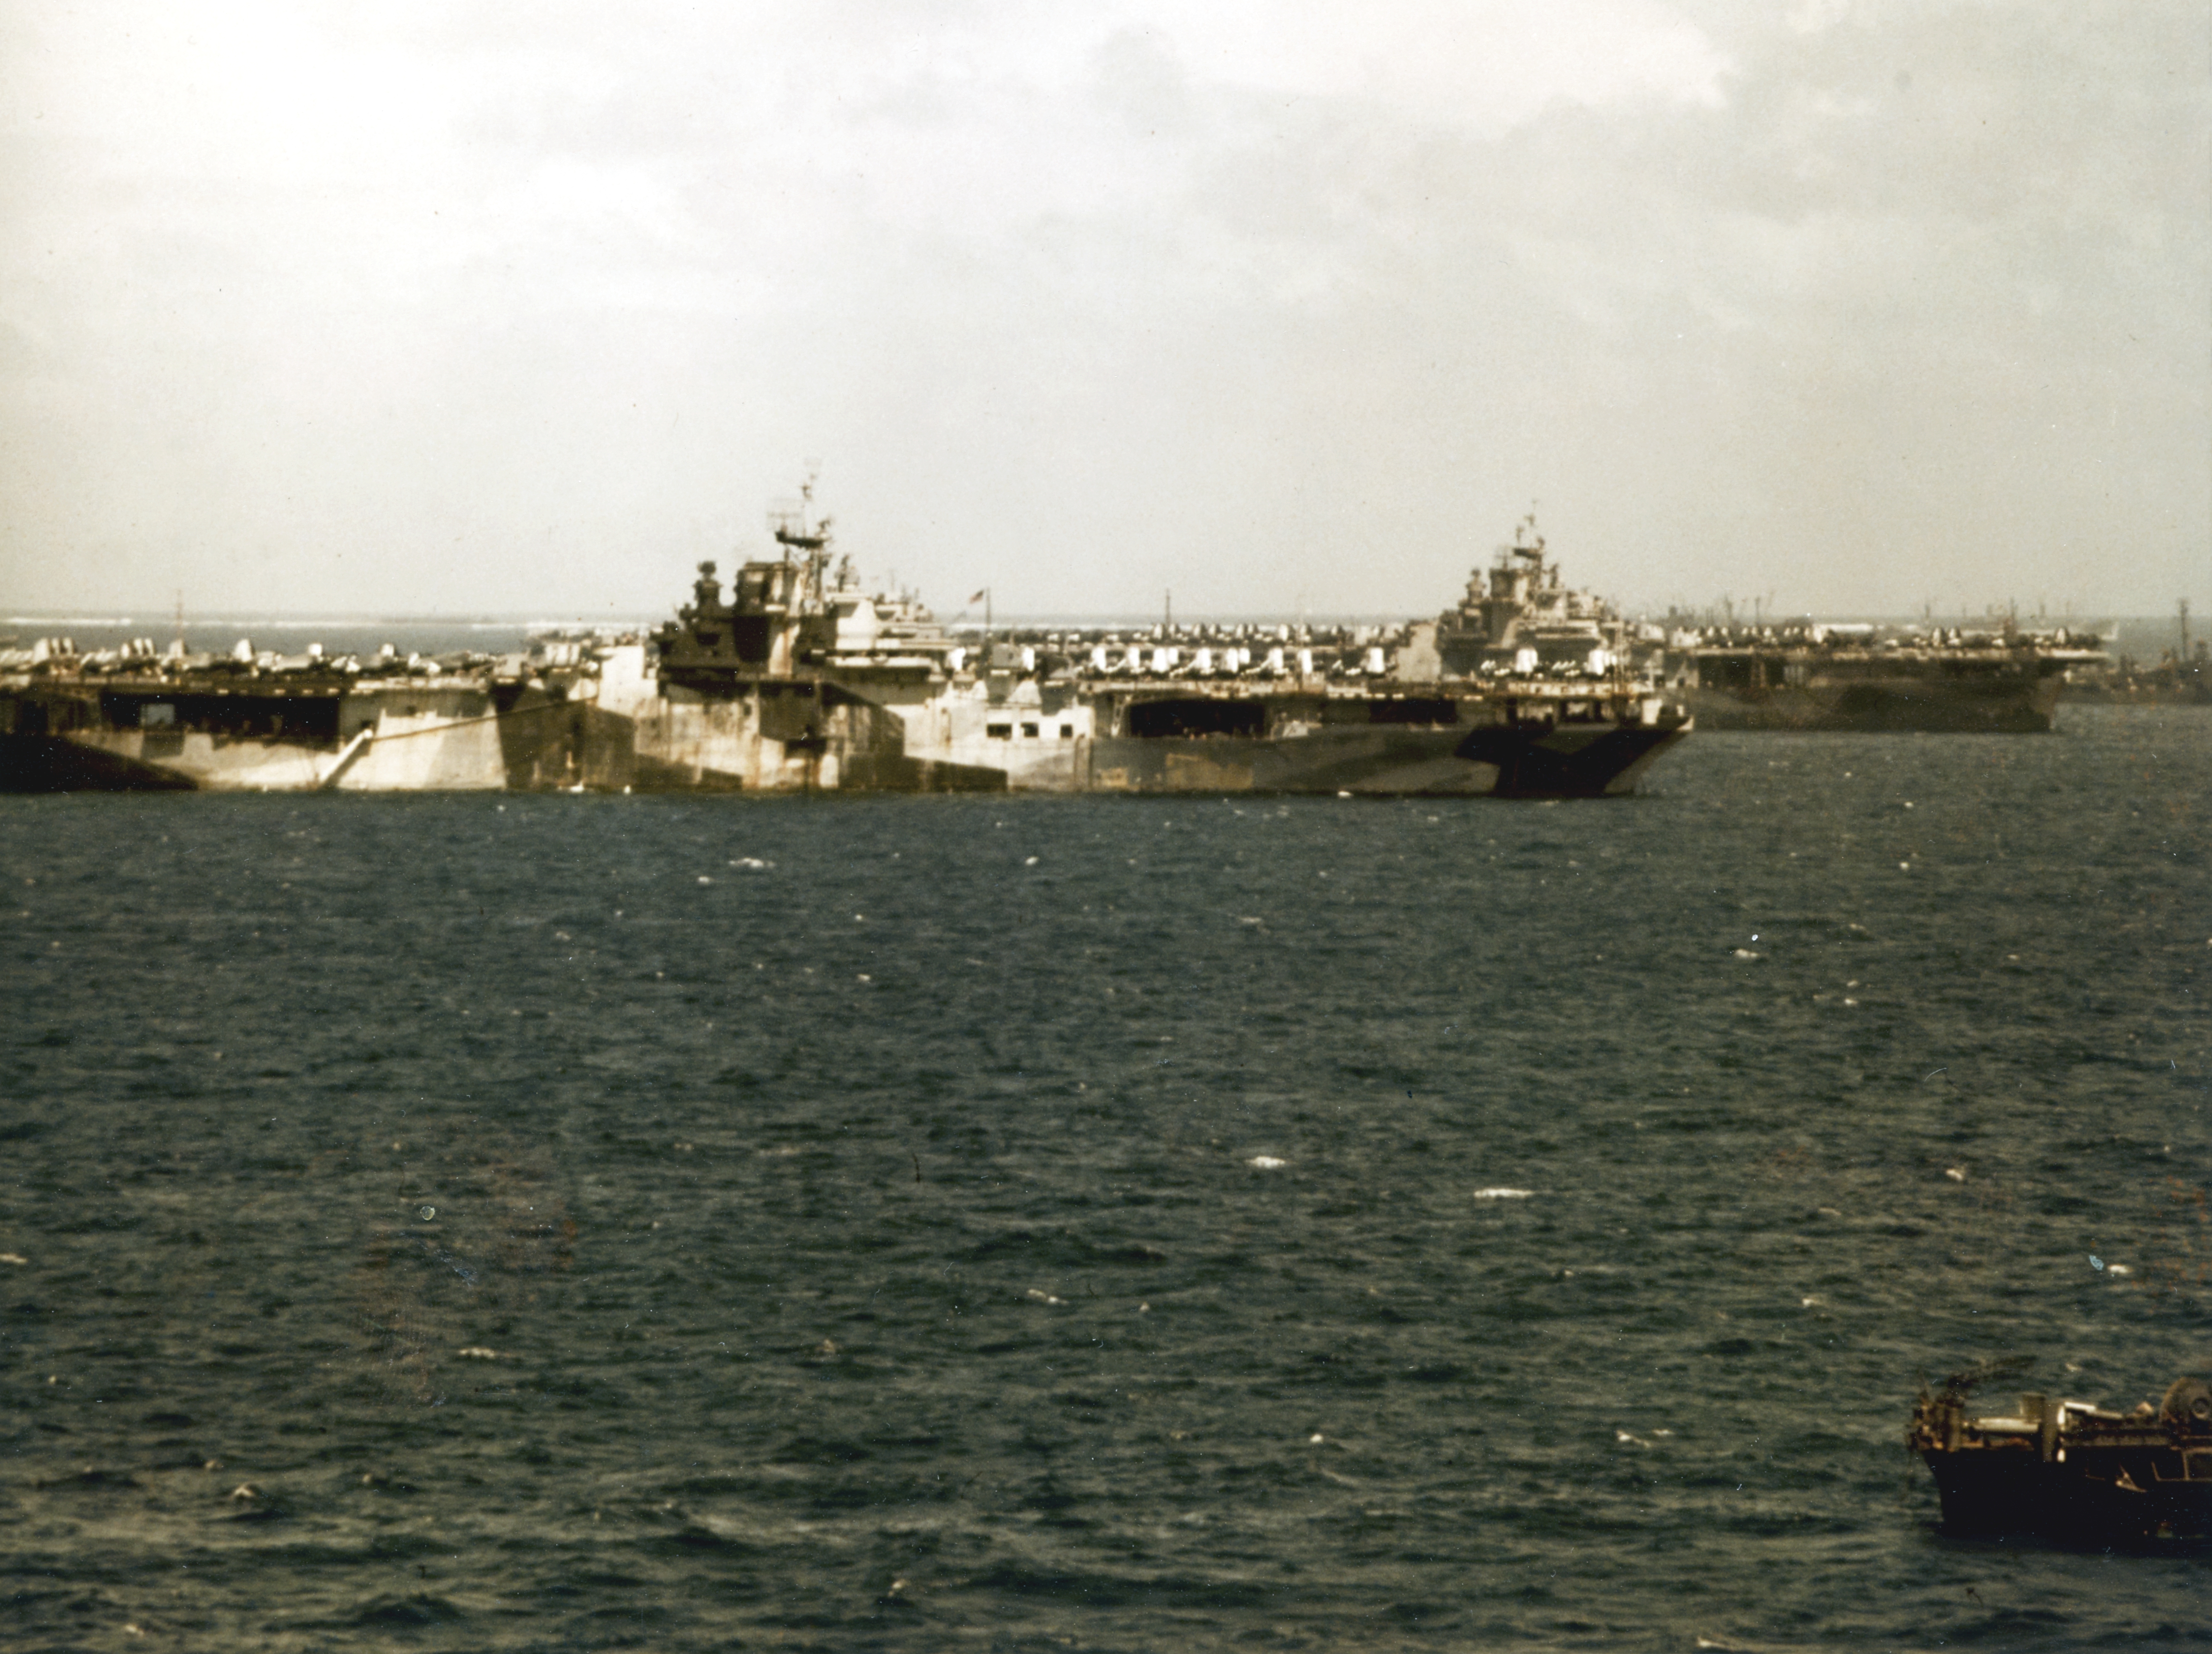 Two (Essex-class) carriers at Ulithi, Caroline Islands, 3 Mar 1945. USS Hancock, in front, is in Berth 22 and USS Wasp is in Berth 29. Both ships show very battle worn paint schemes.